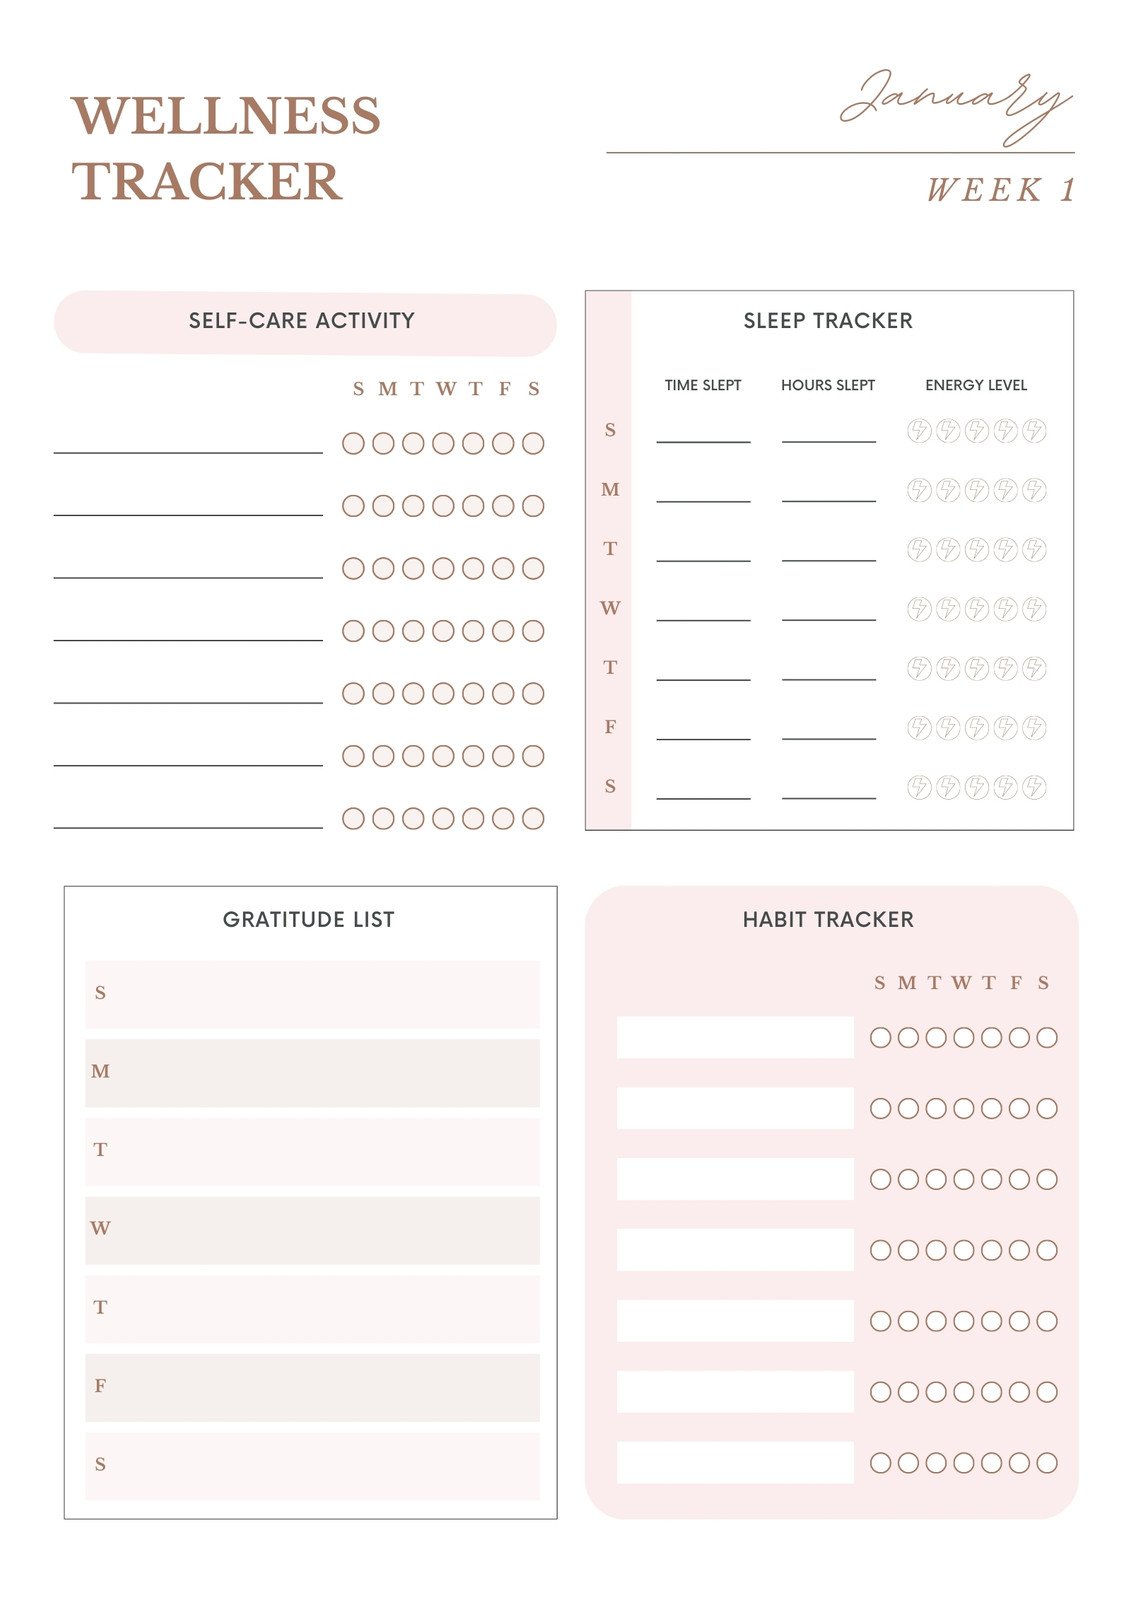 Customize 103+ Health Planner Templates Online - Canva